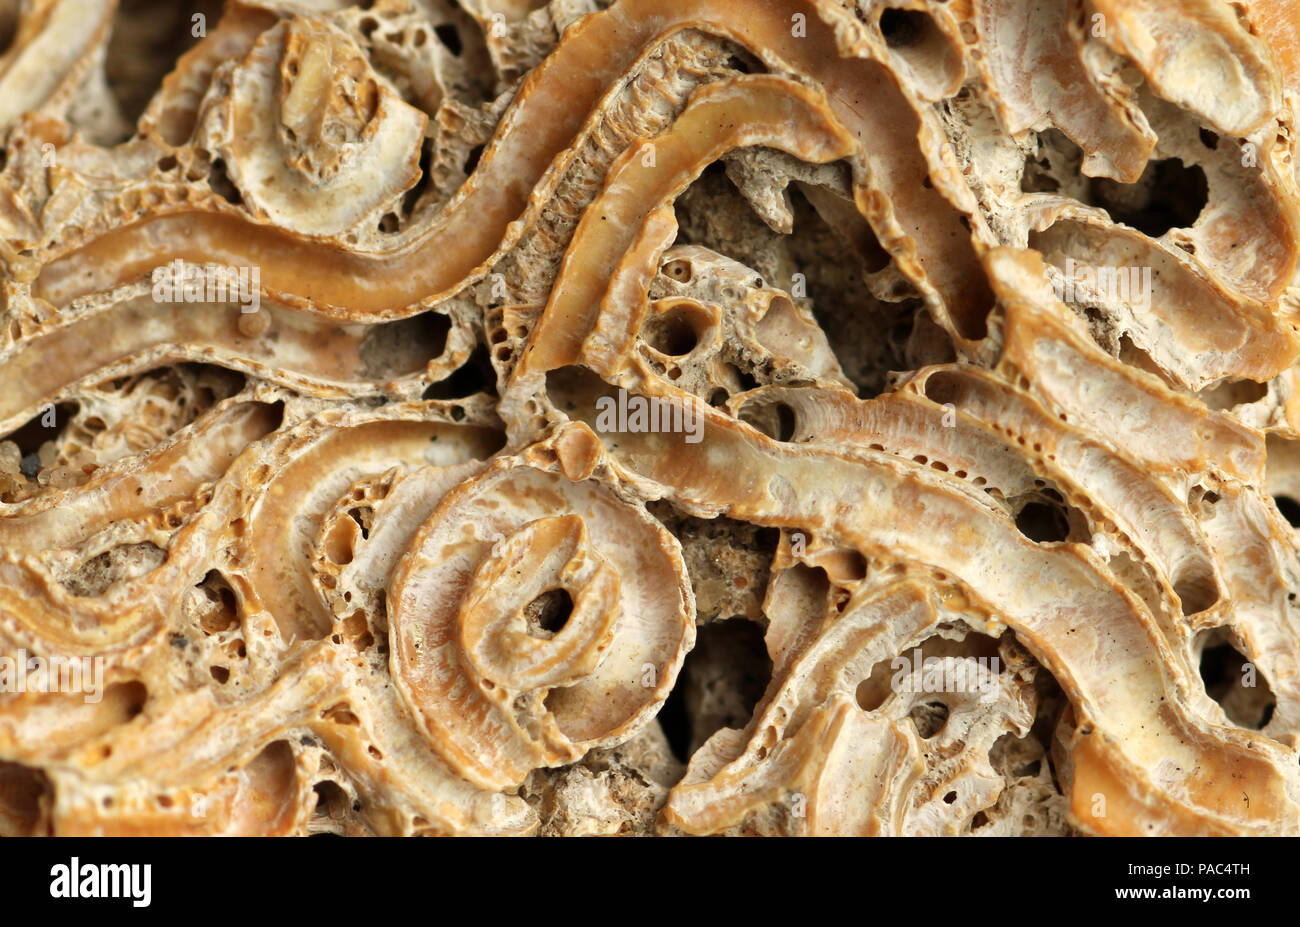 worm casings of Keel worms Stock Photo